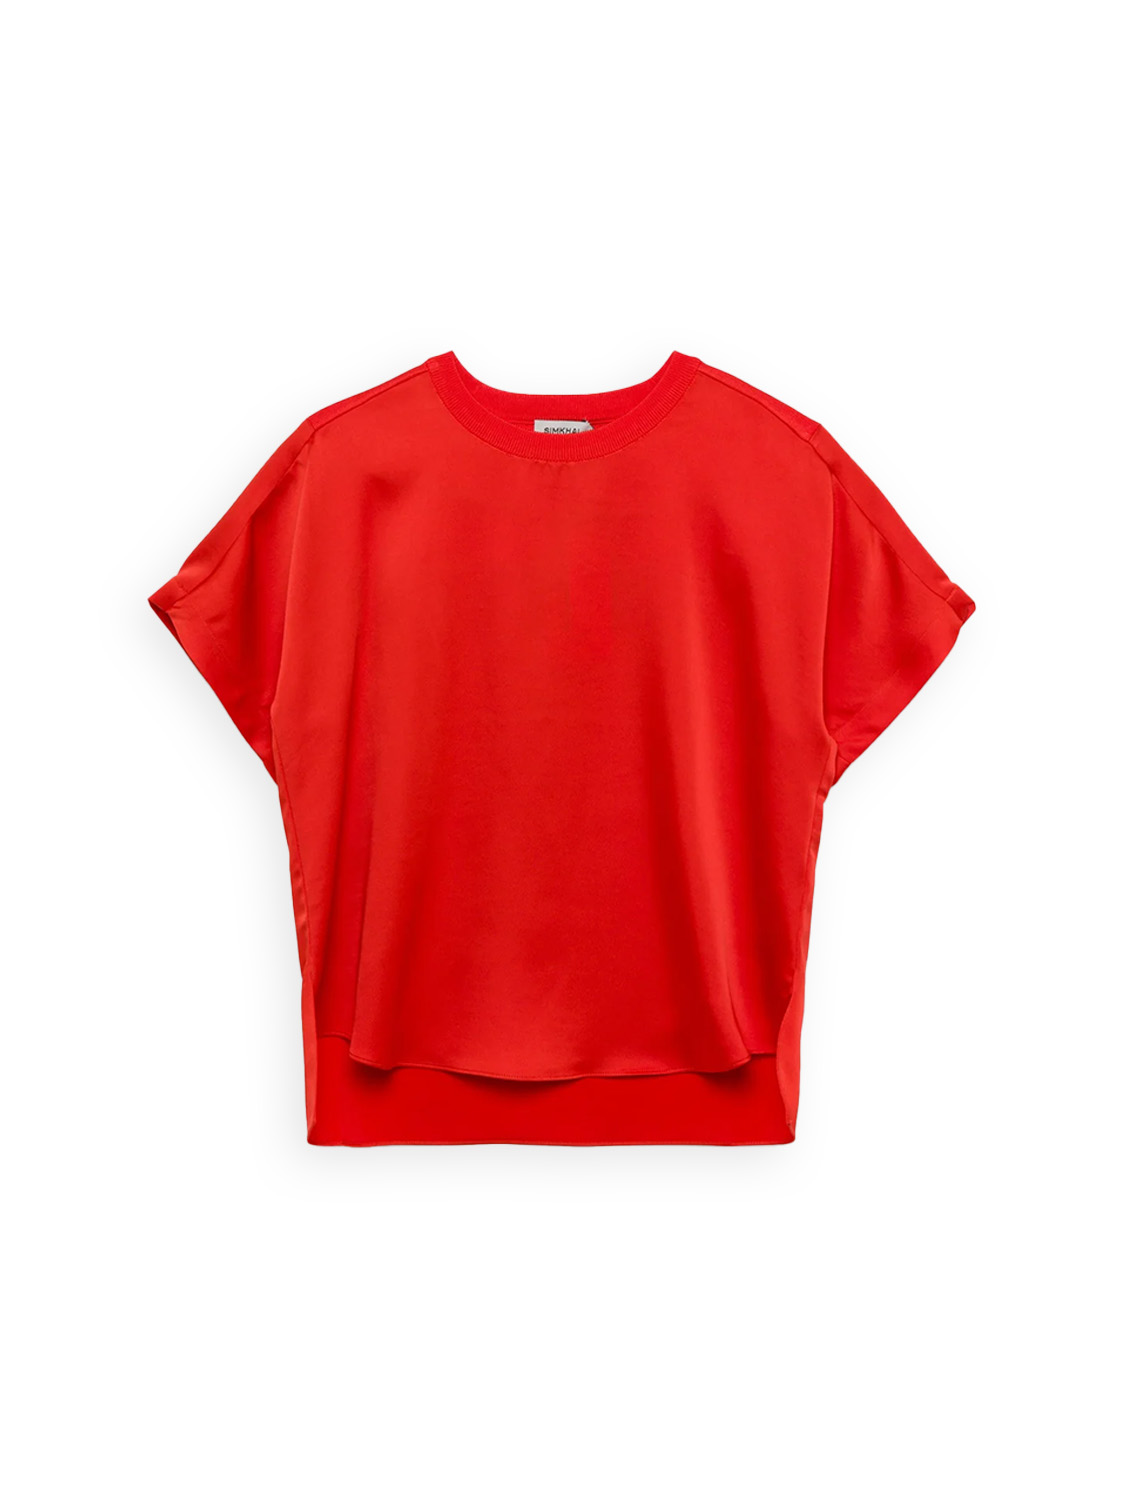 Simkhai Addy – T-Shirt with a knit back  red S